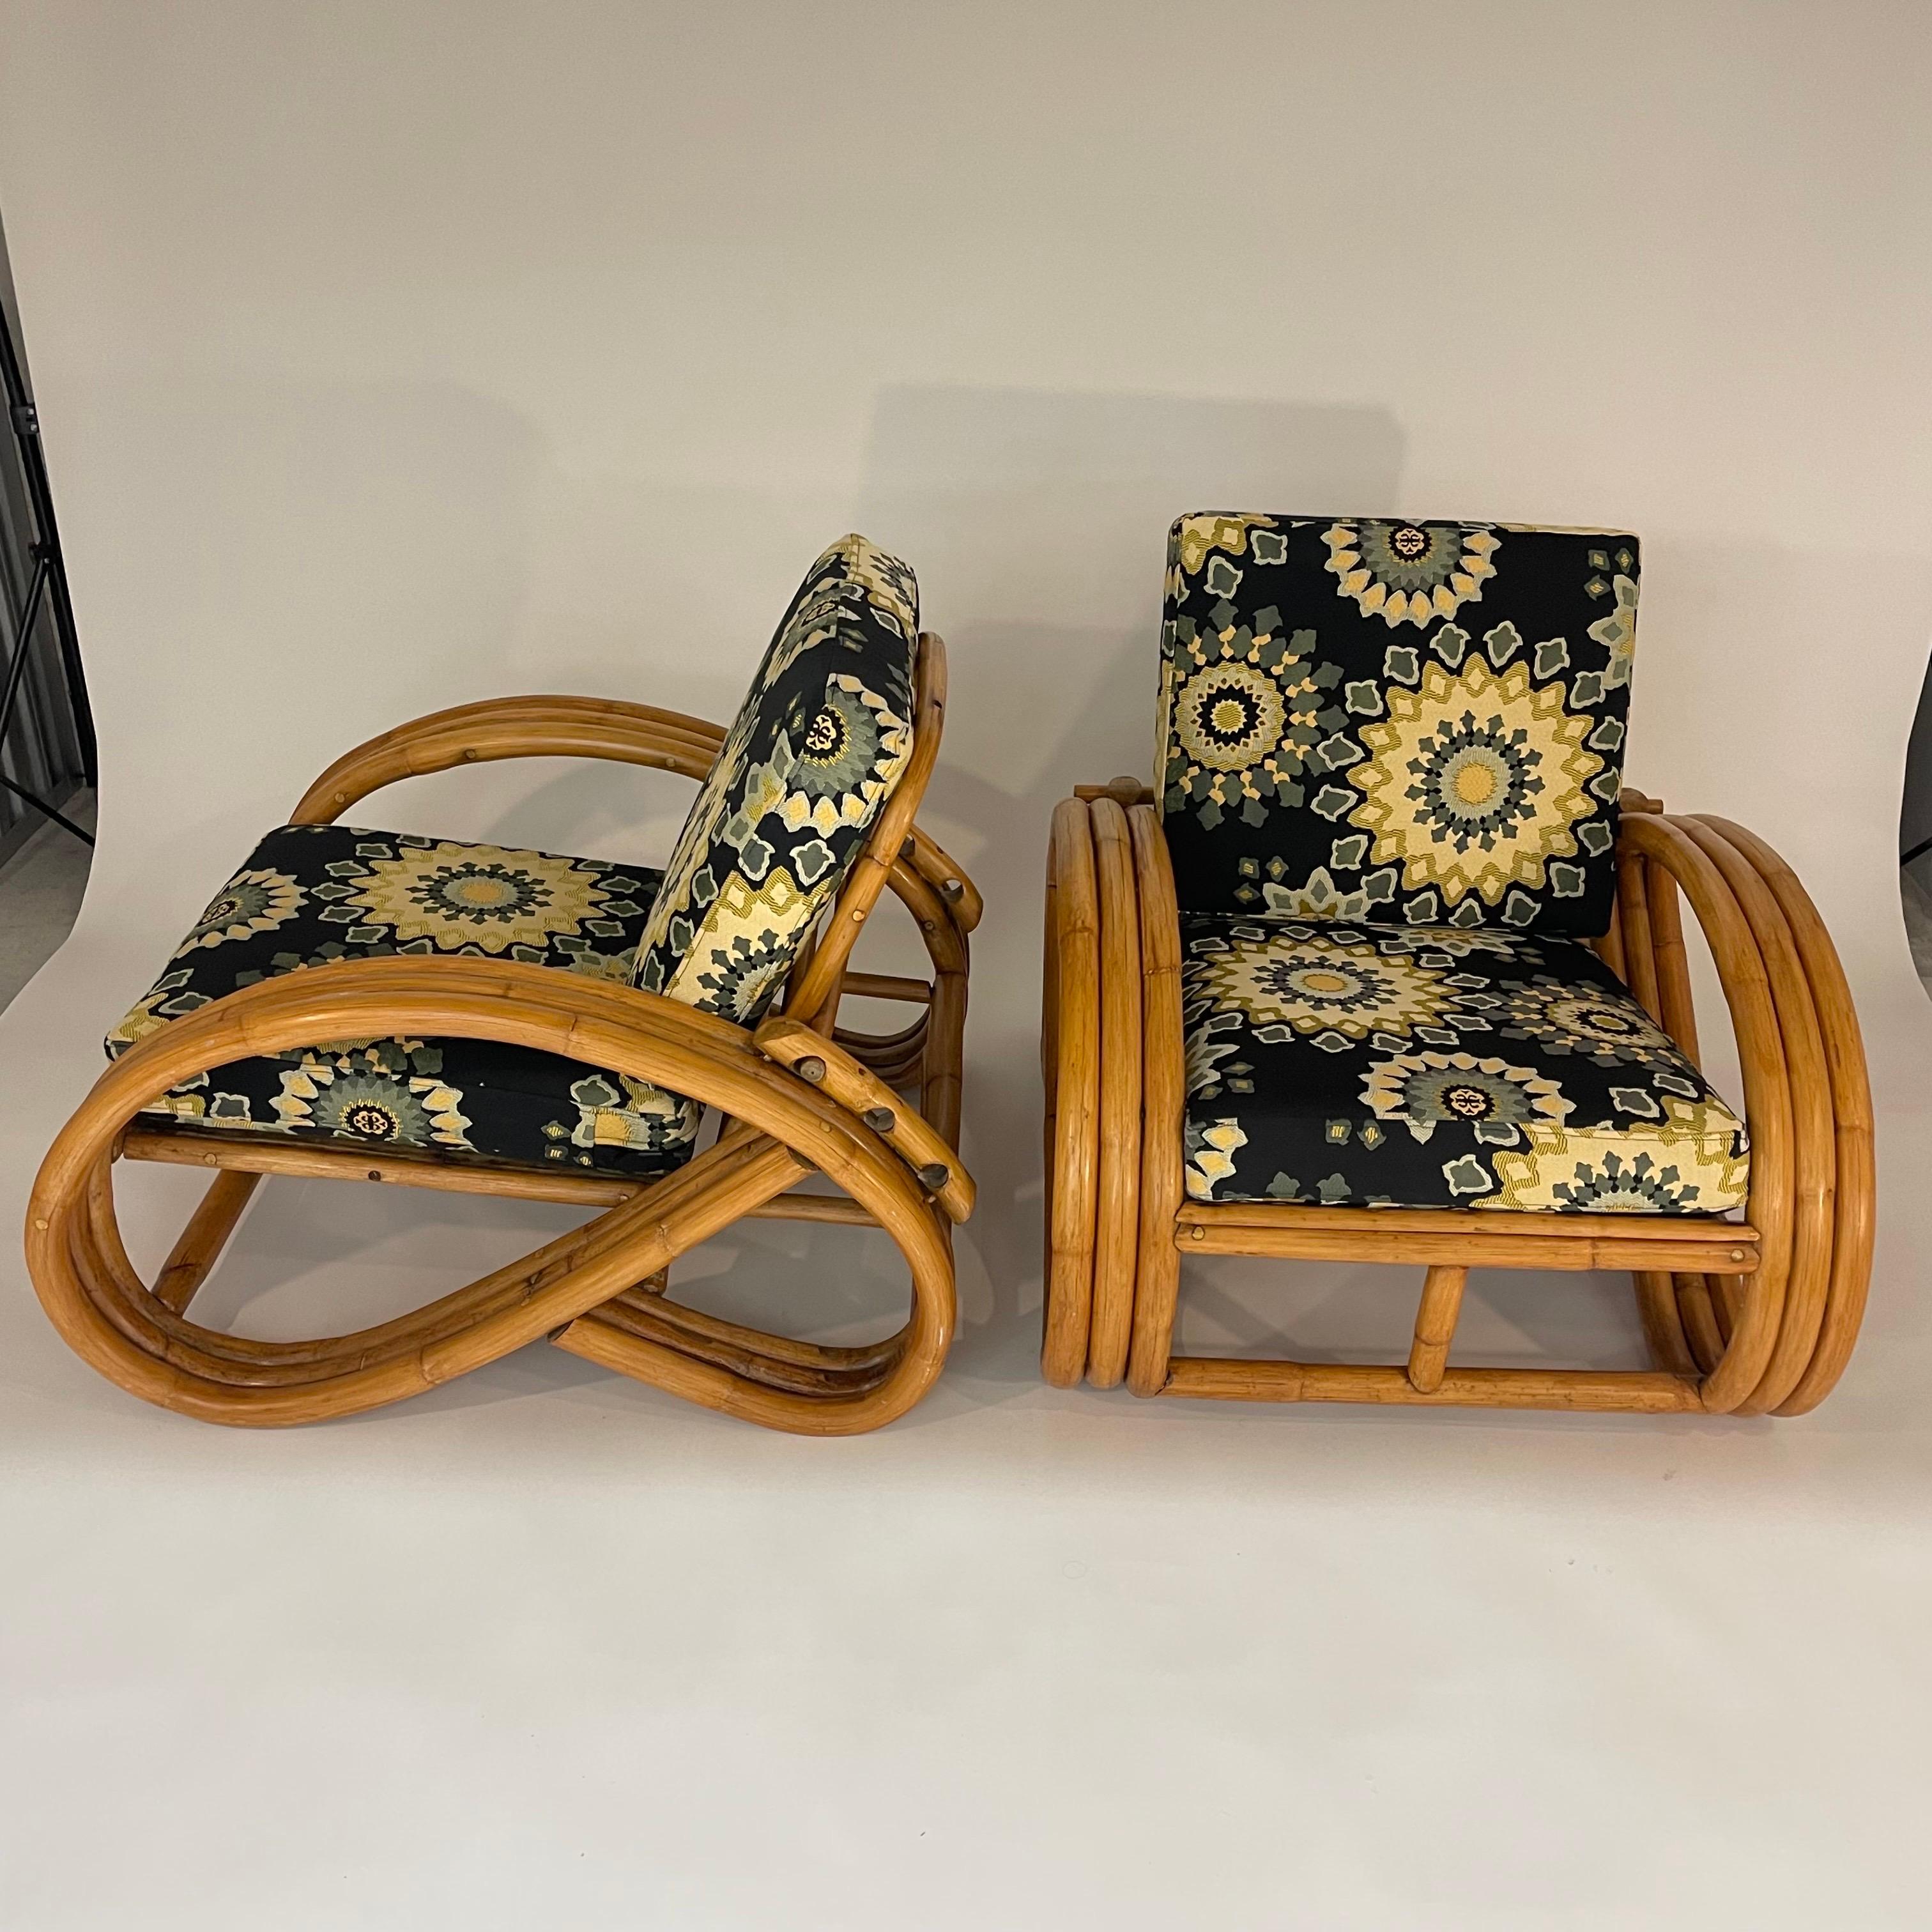 Art Deco Pair of Paul Frankl Style Pretzel Club or Lounge Chairs, USA, 1940s For Sale 1